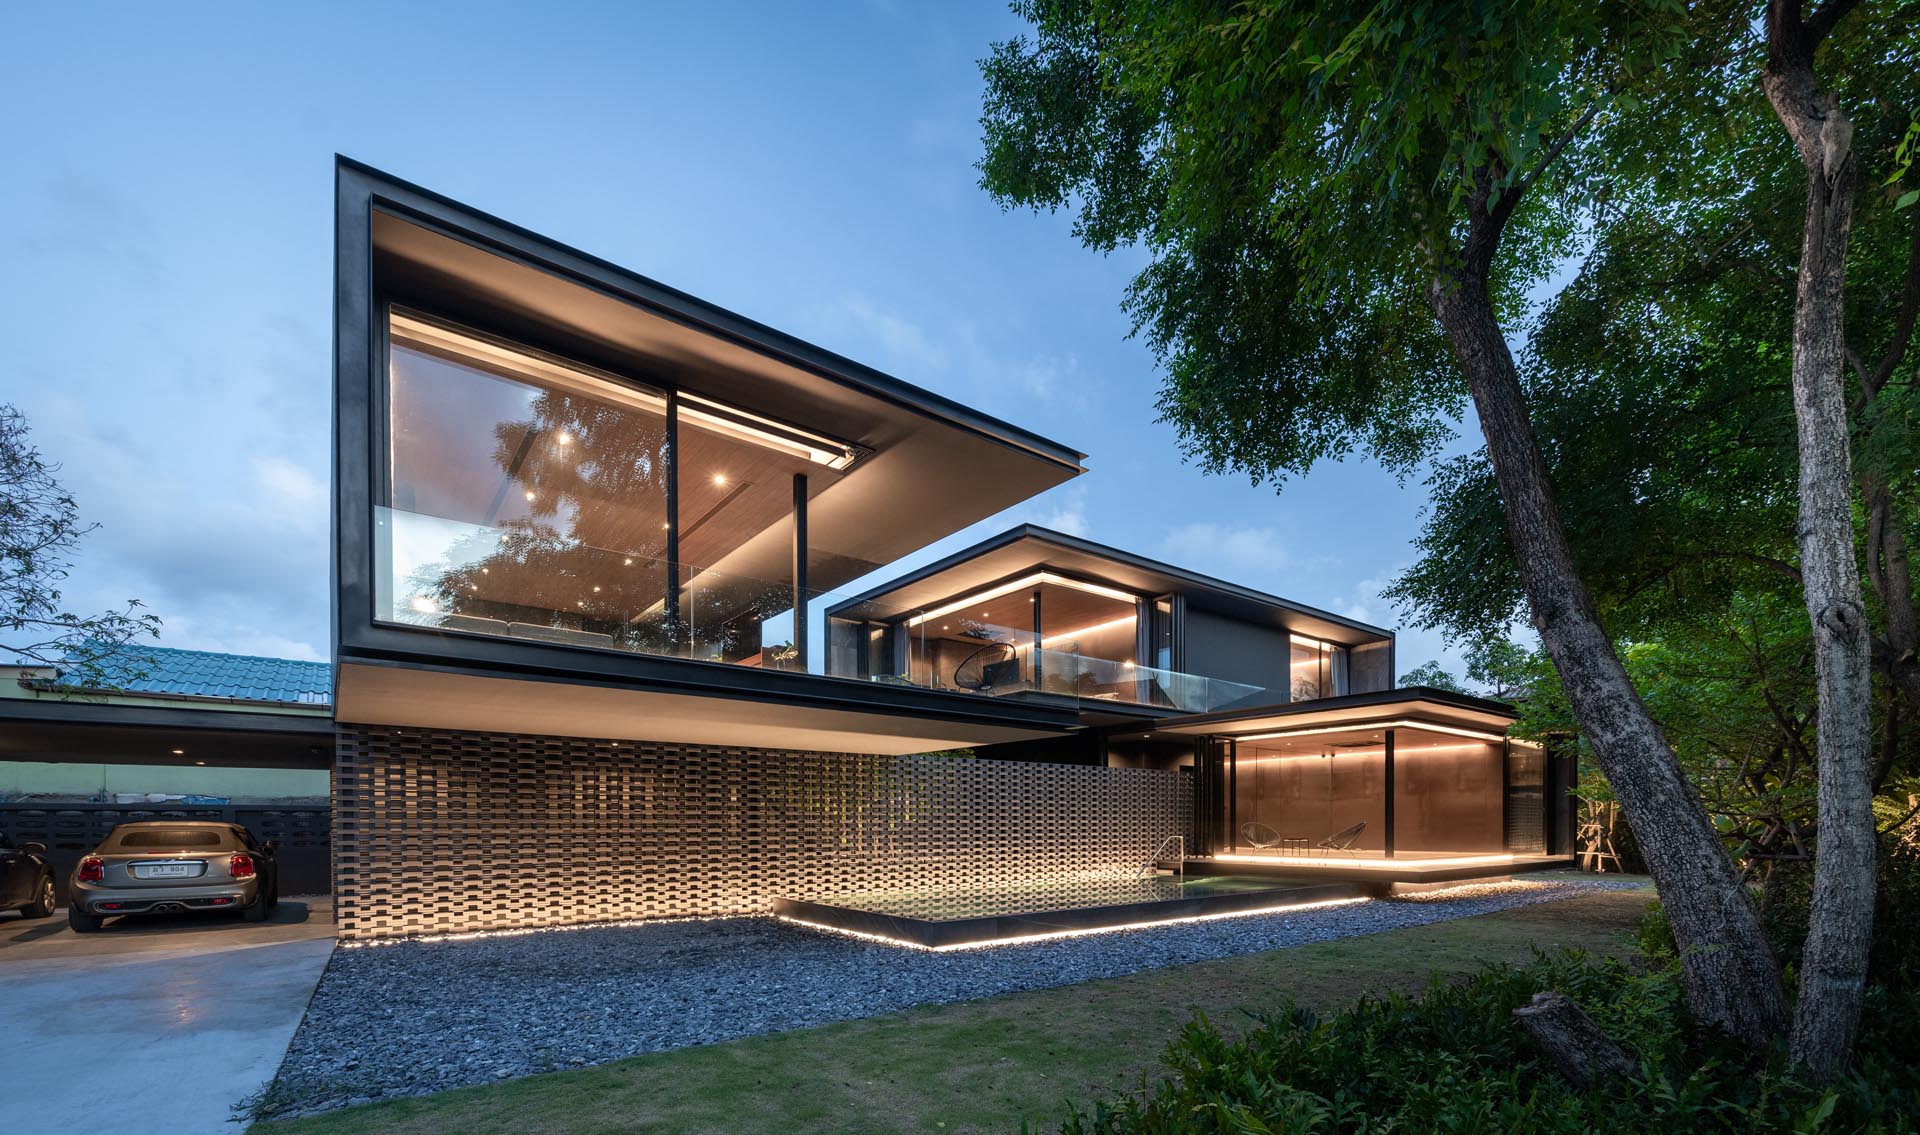 Lighting has been used to highlight the lines of this modern house.